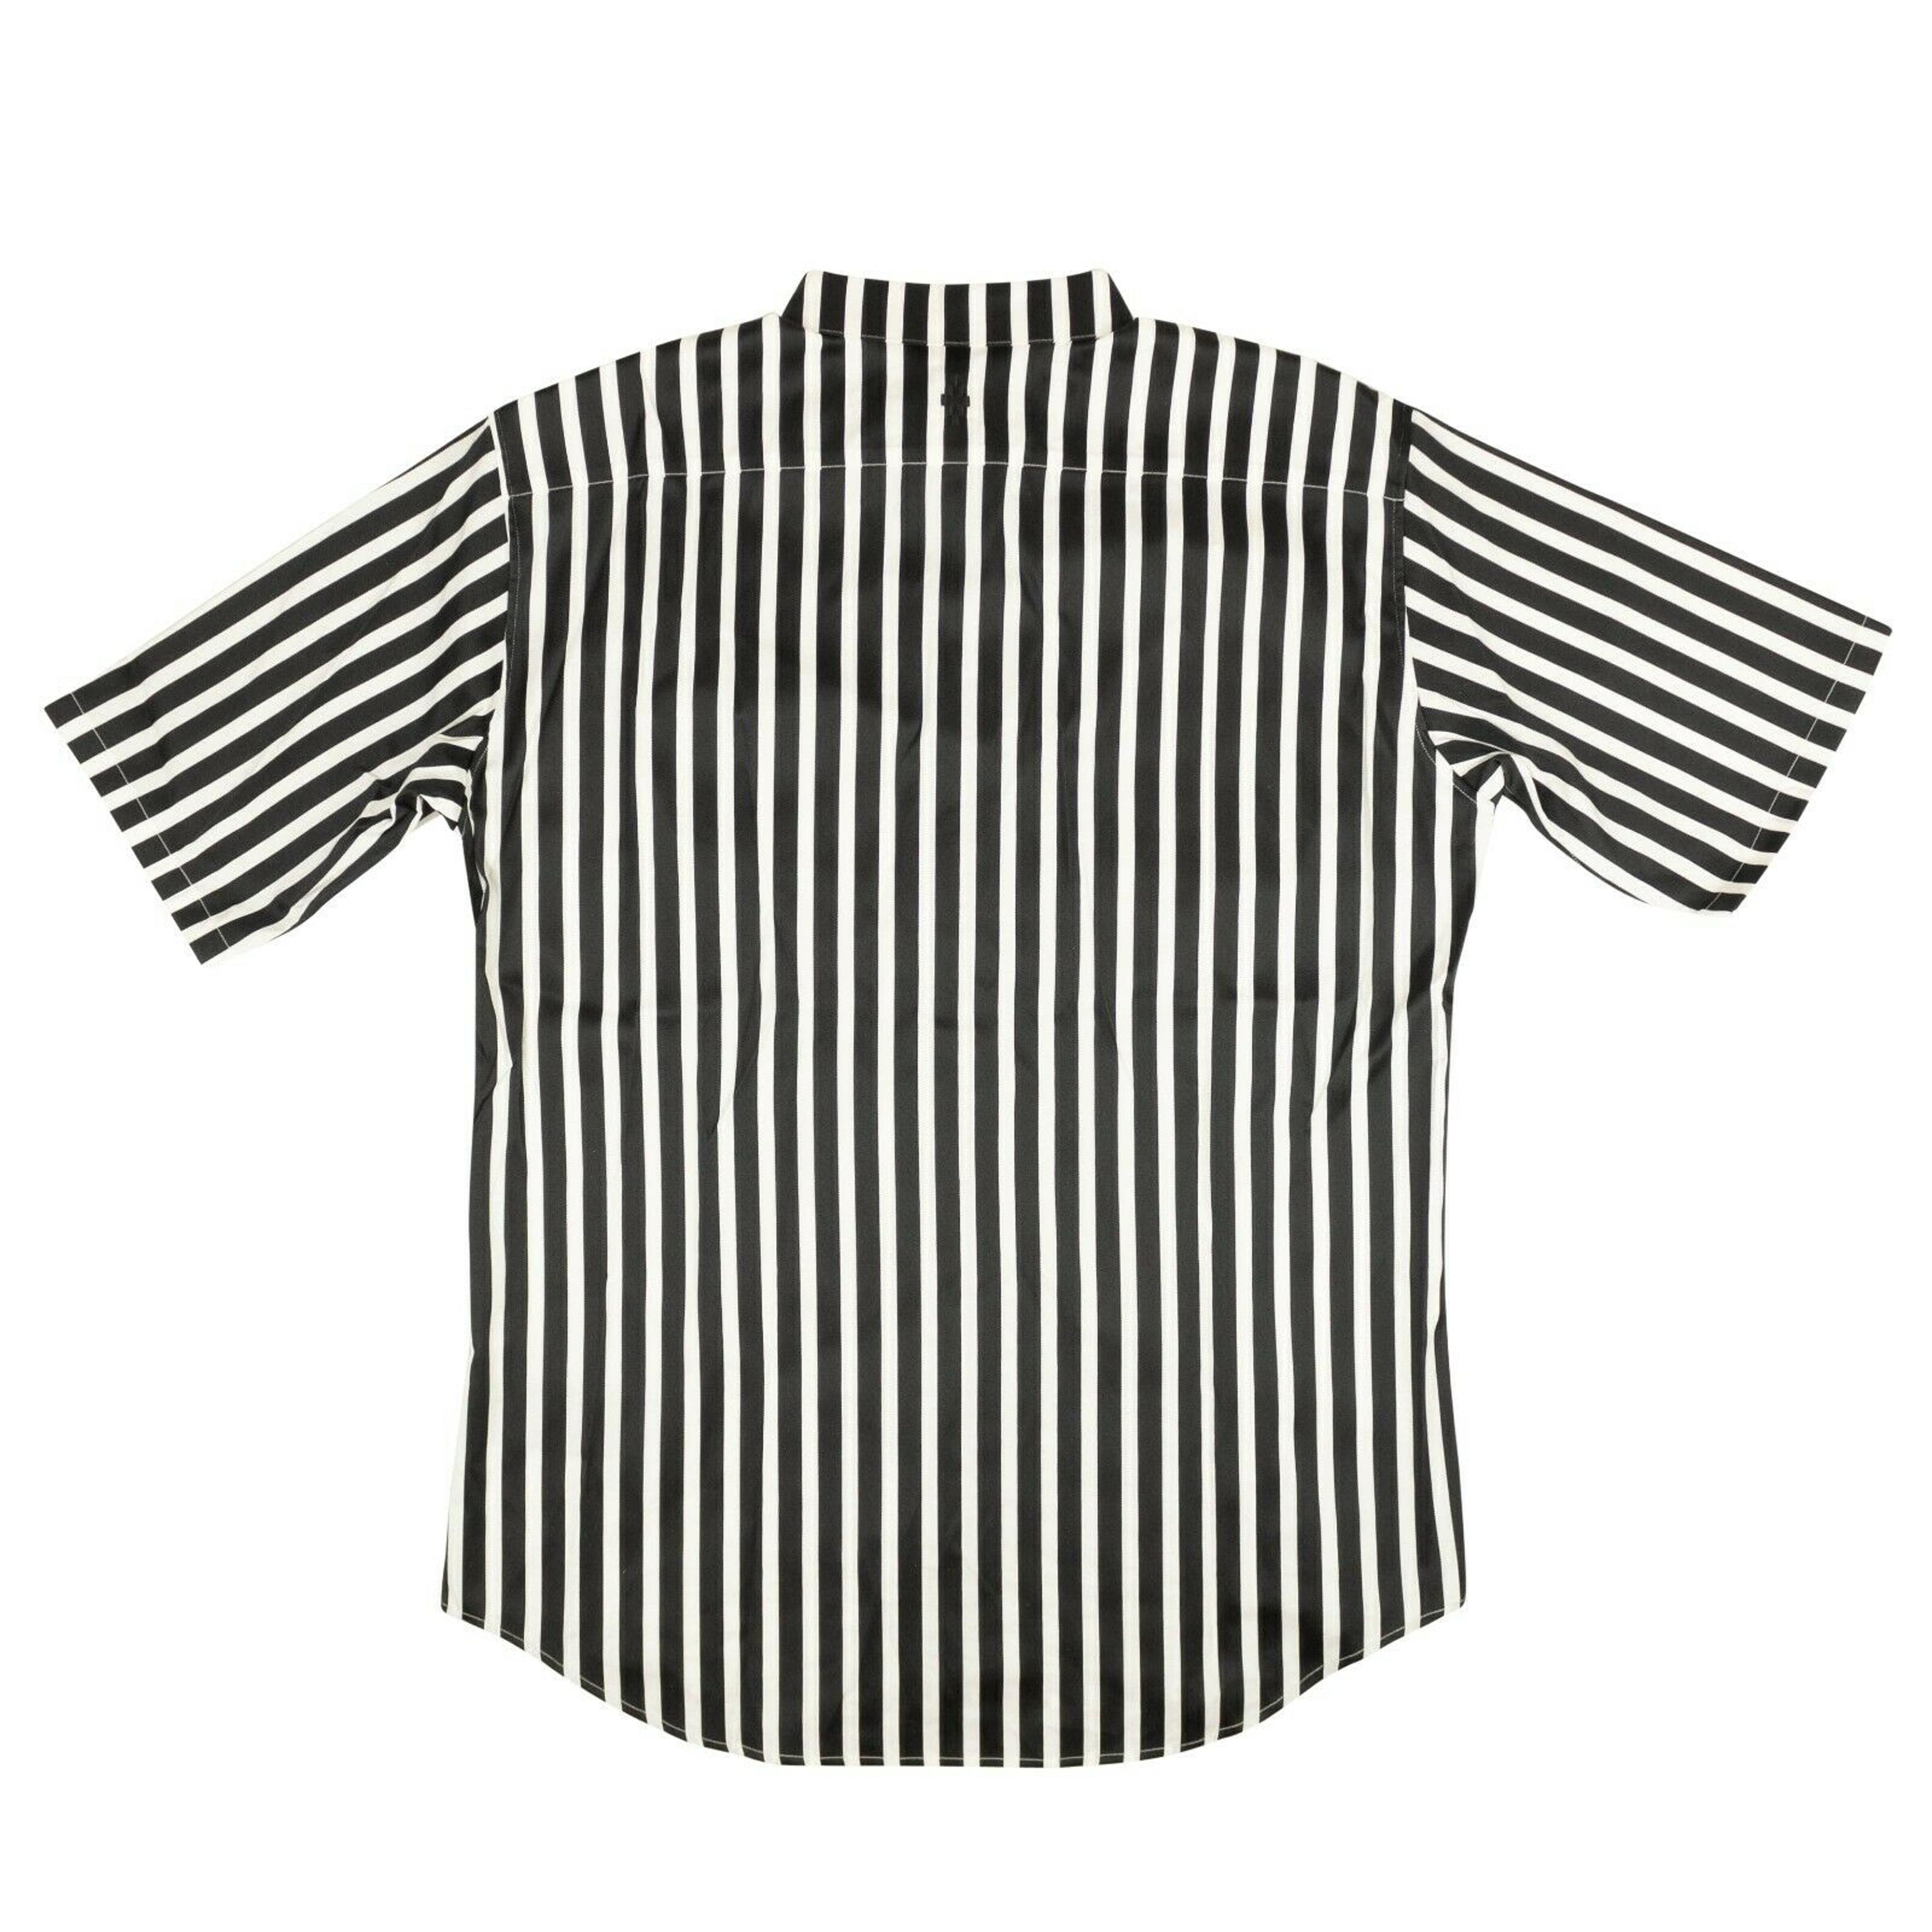 Alternate View 1 of Black And White Striped Confidencial Shirt